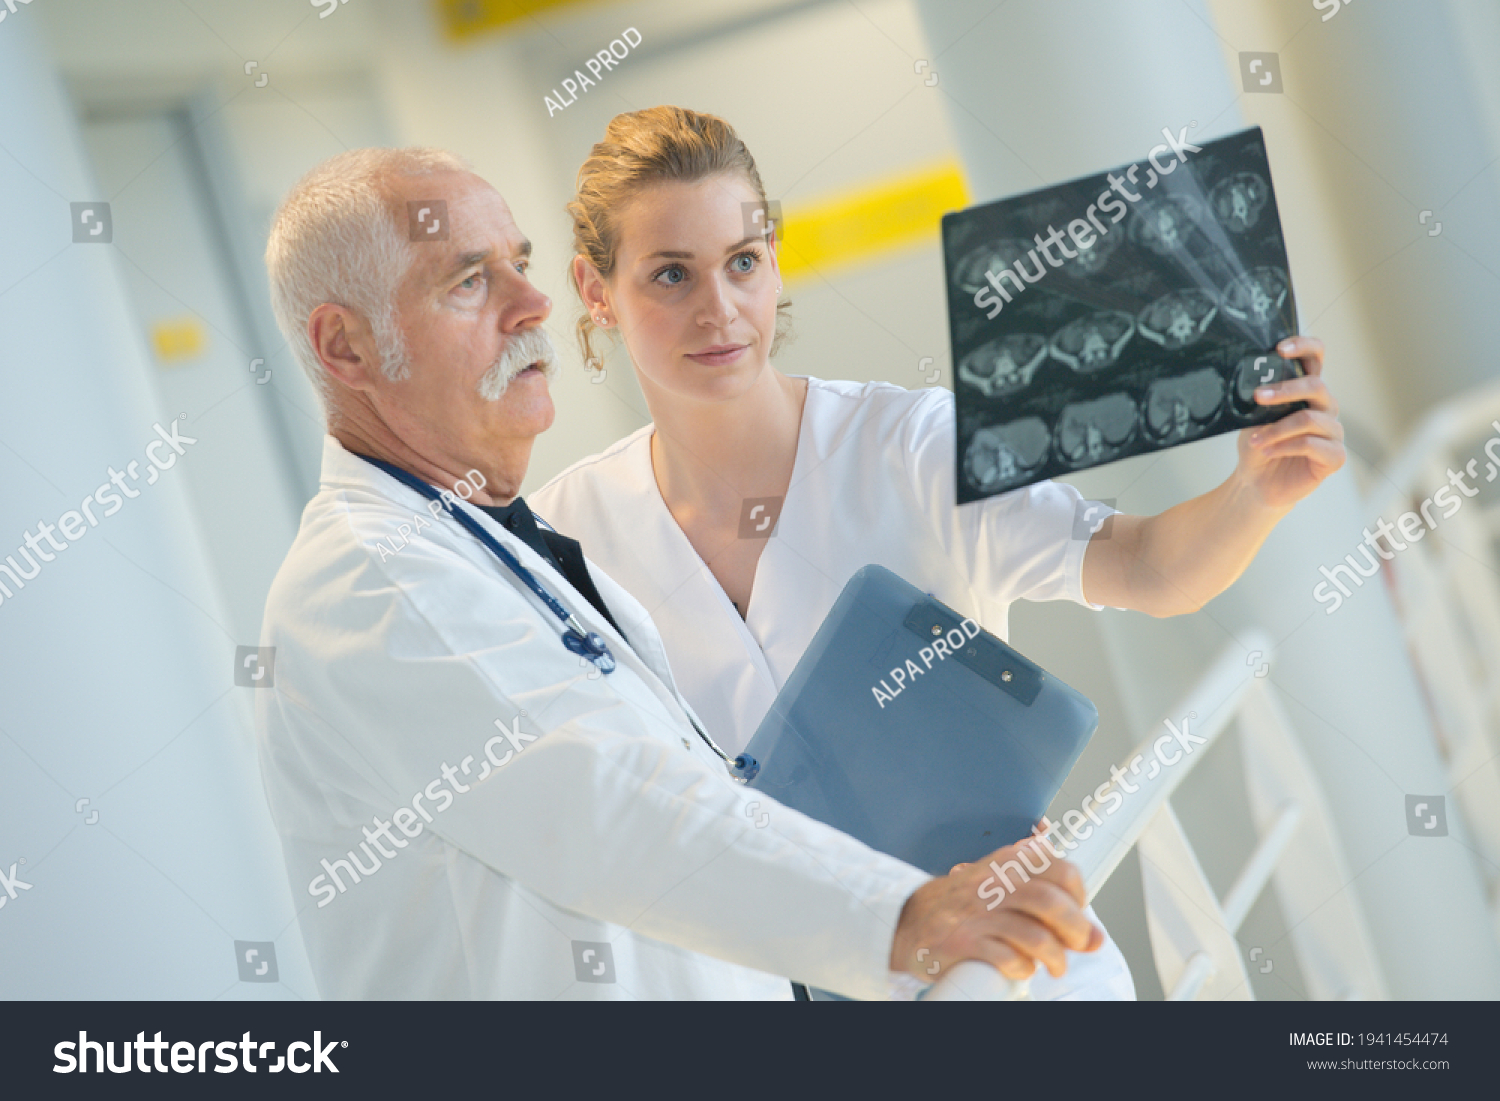 medic and assistant looking at x-ray #1941454474